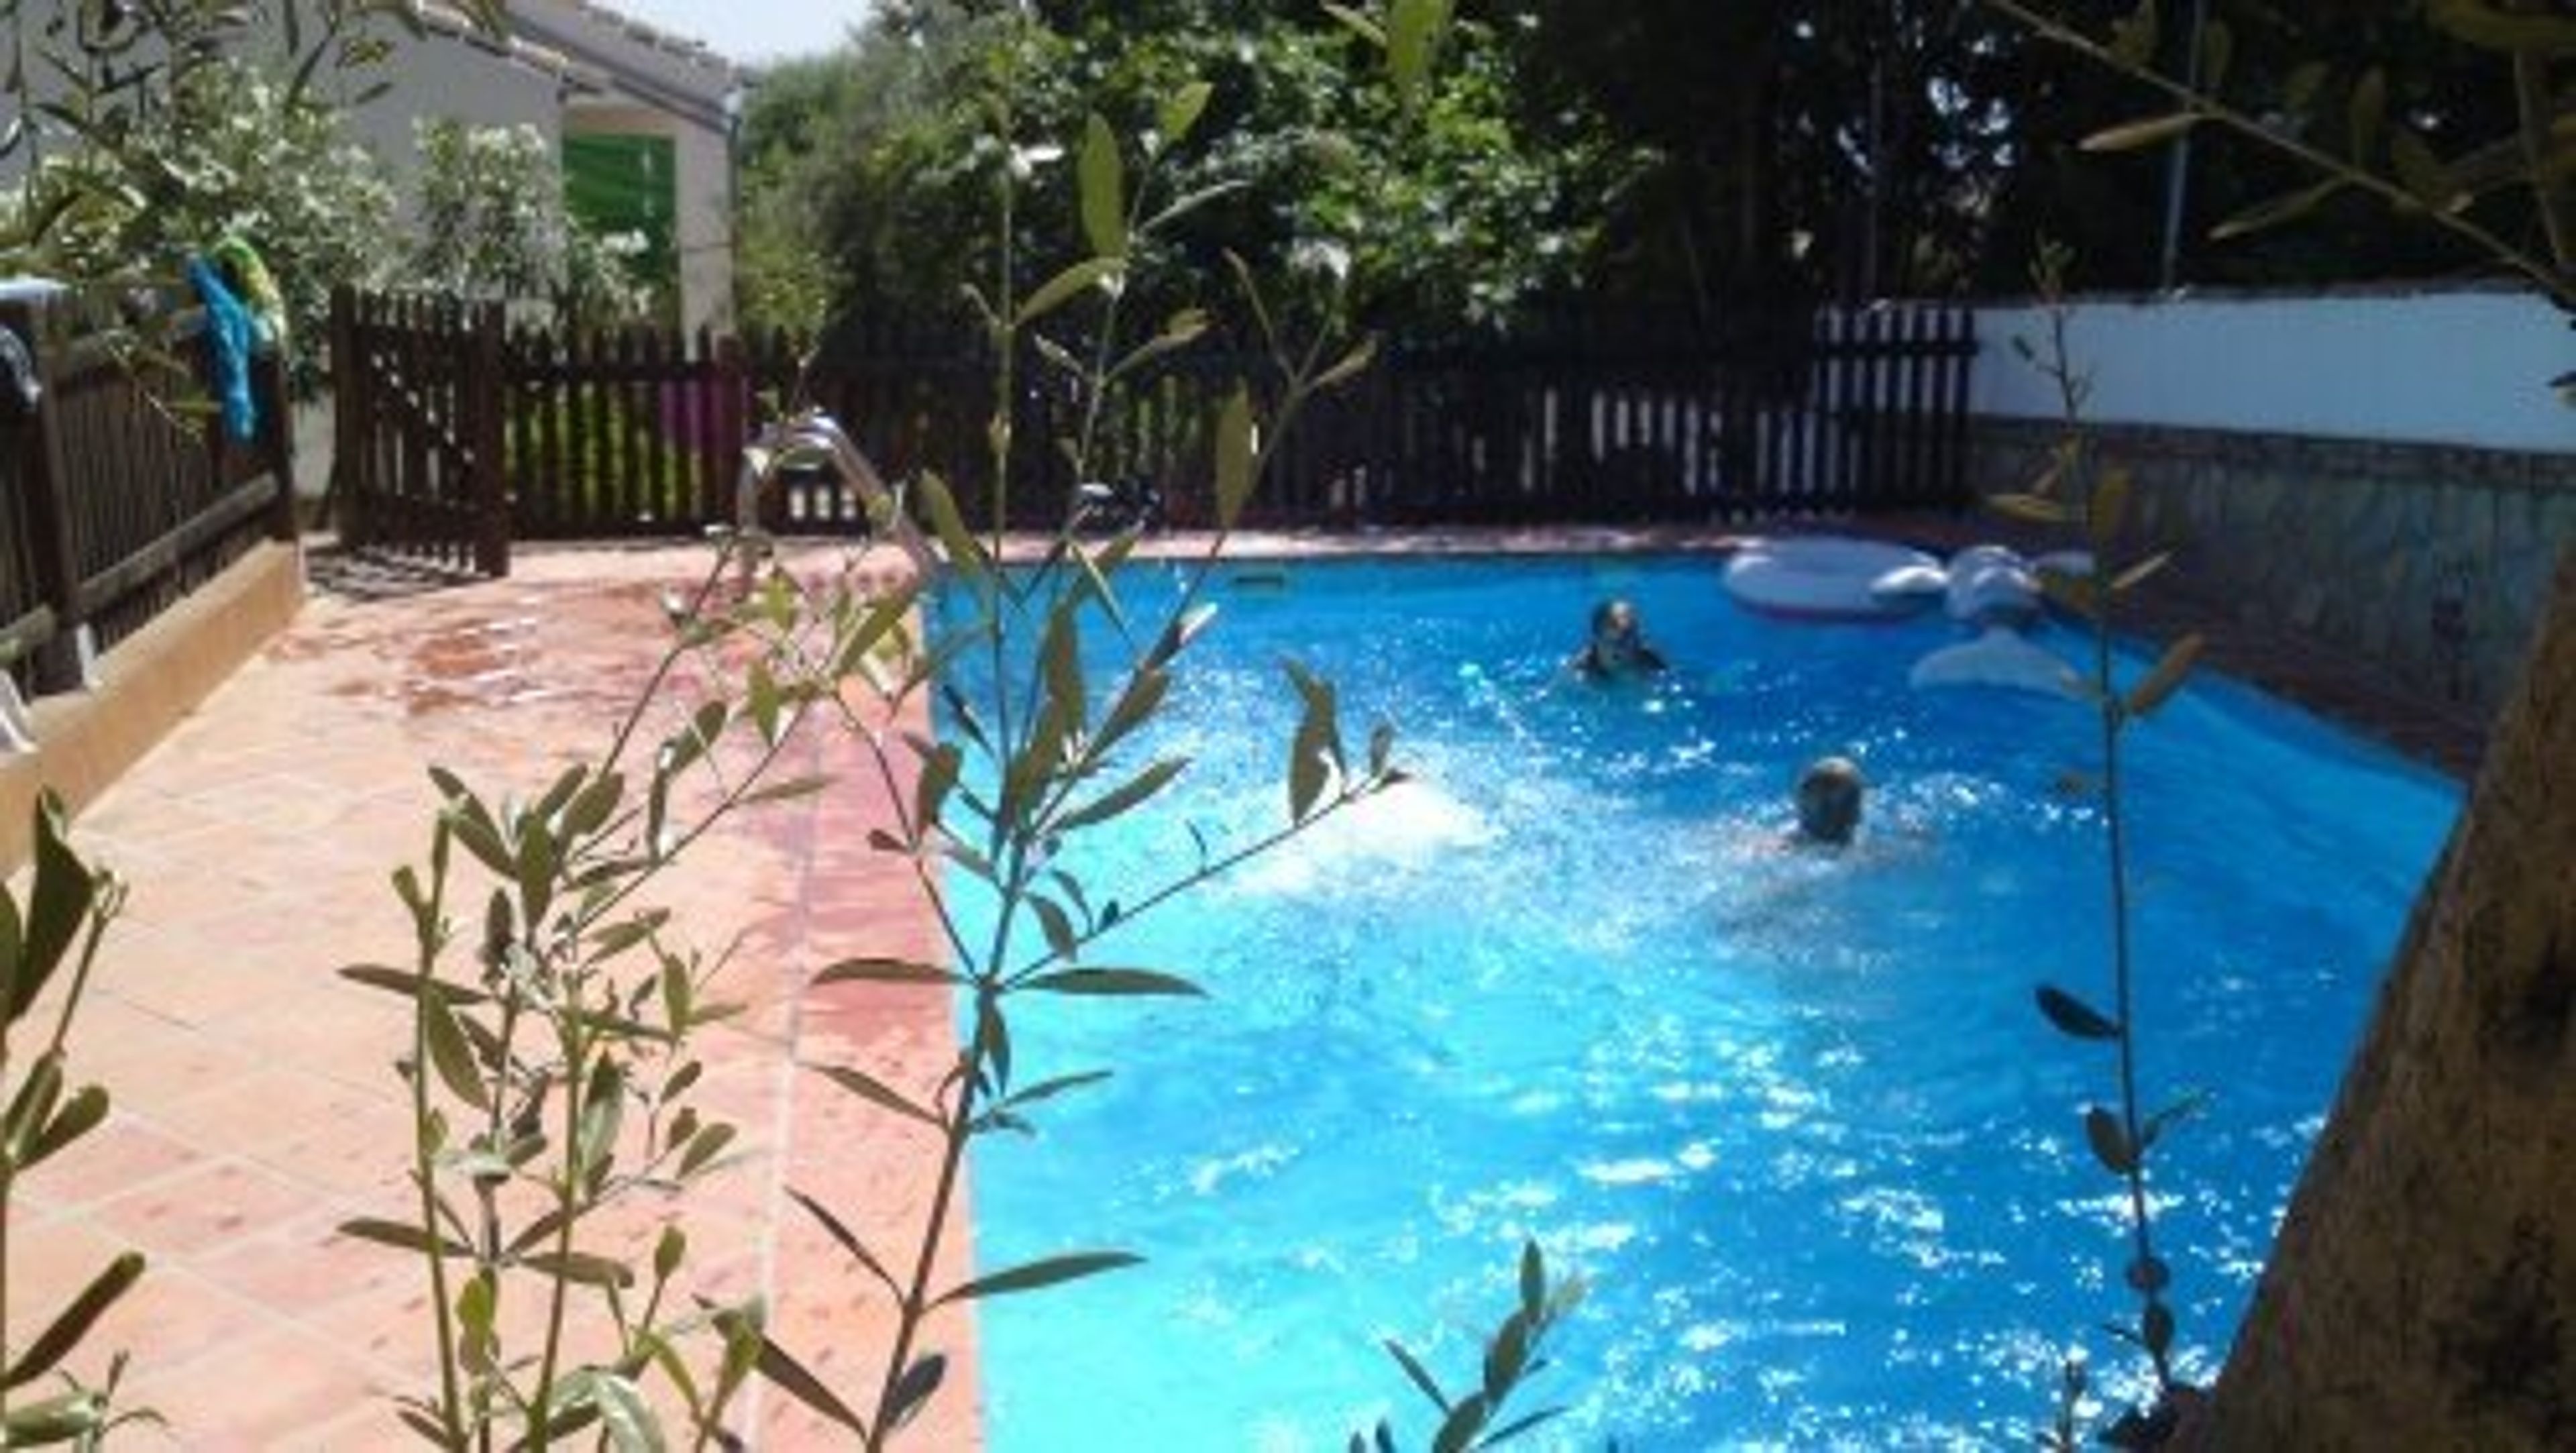 The fenced and heated eight metre pool